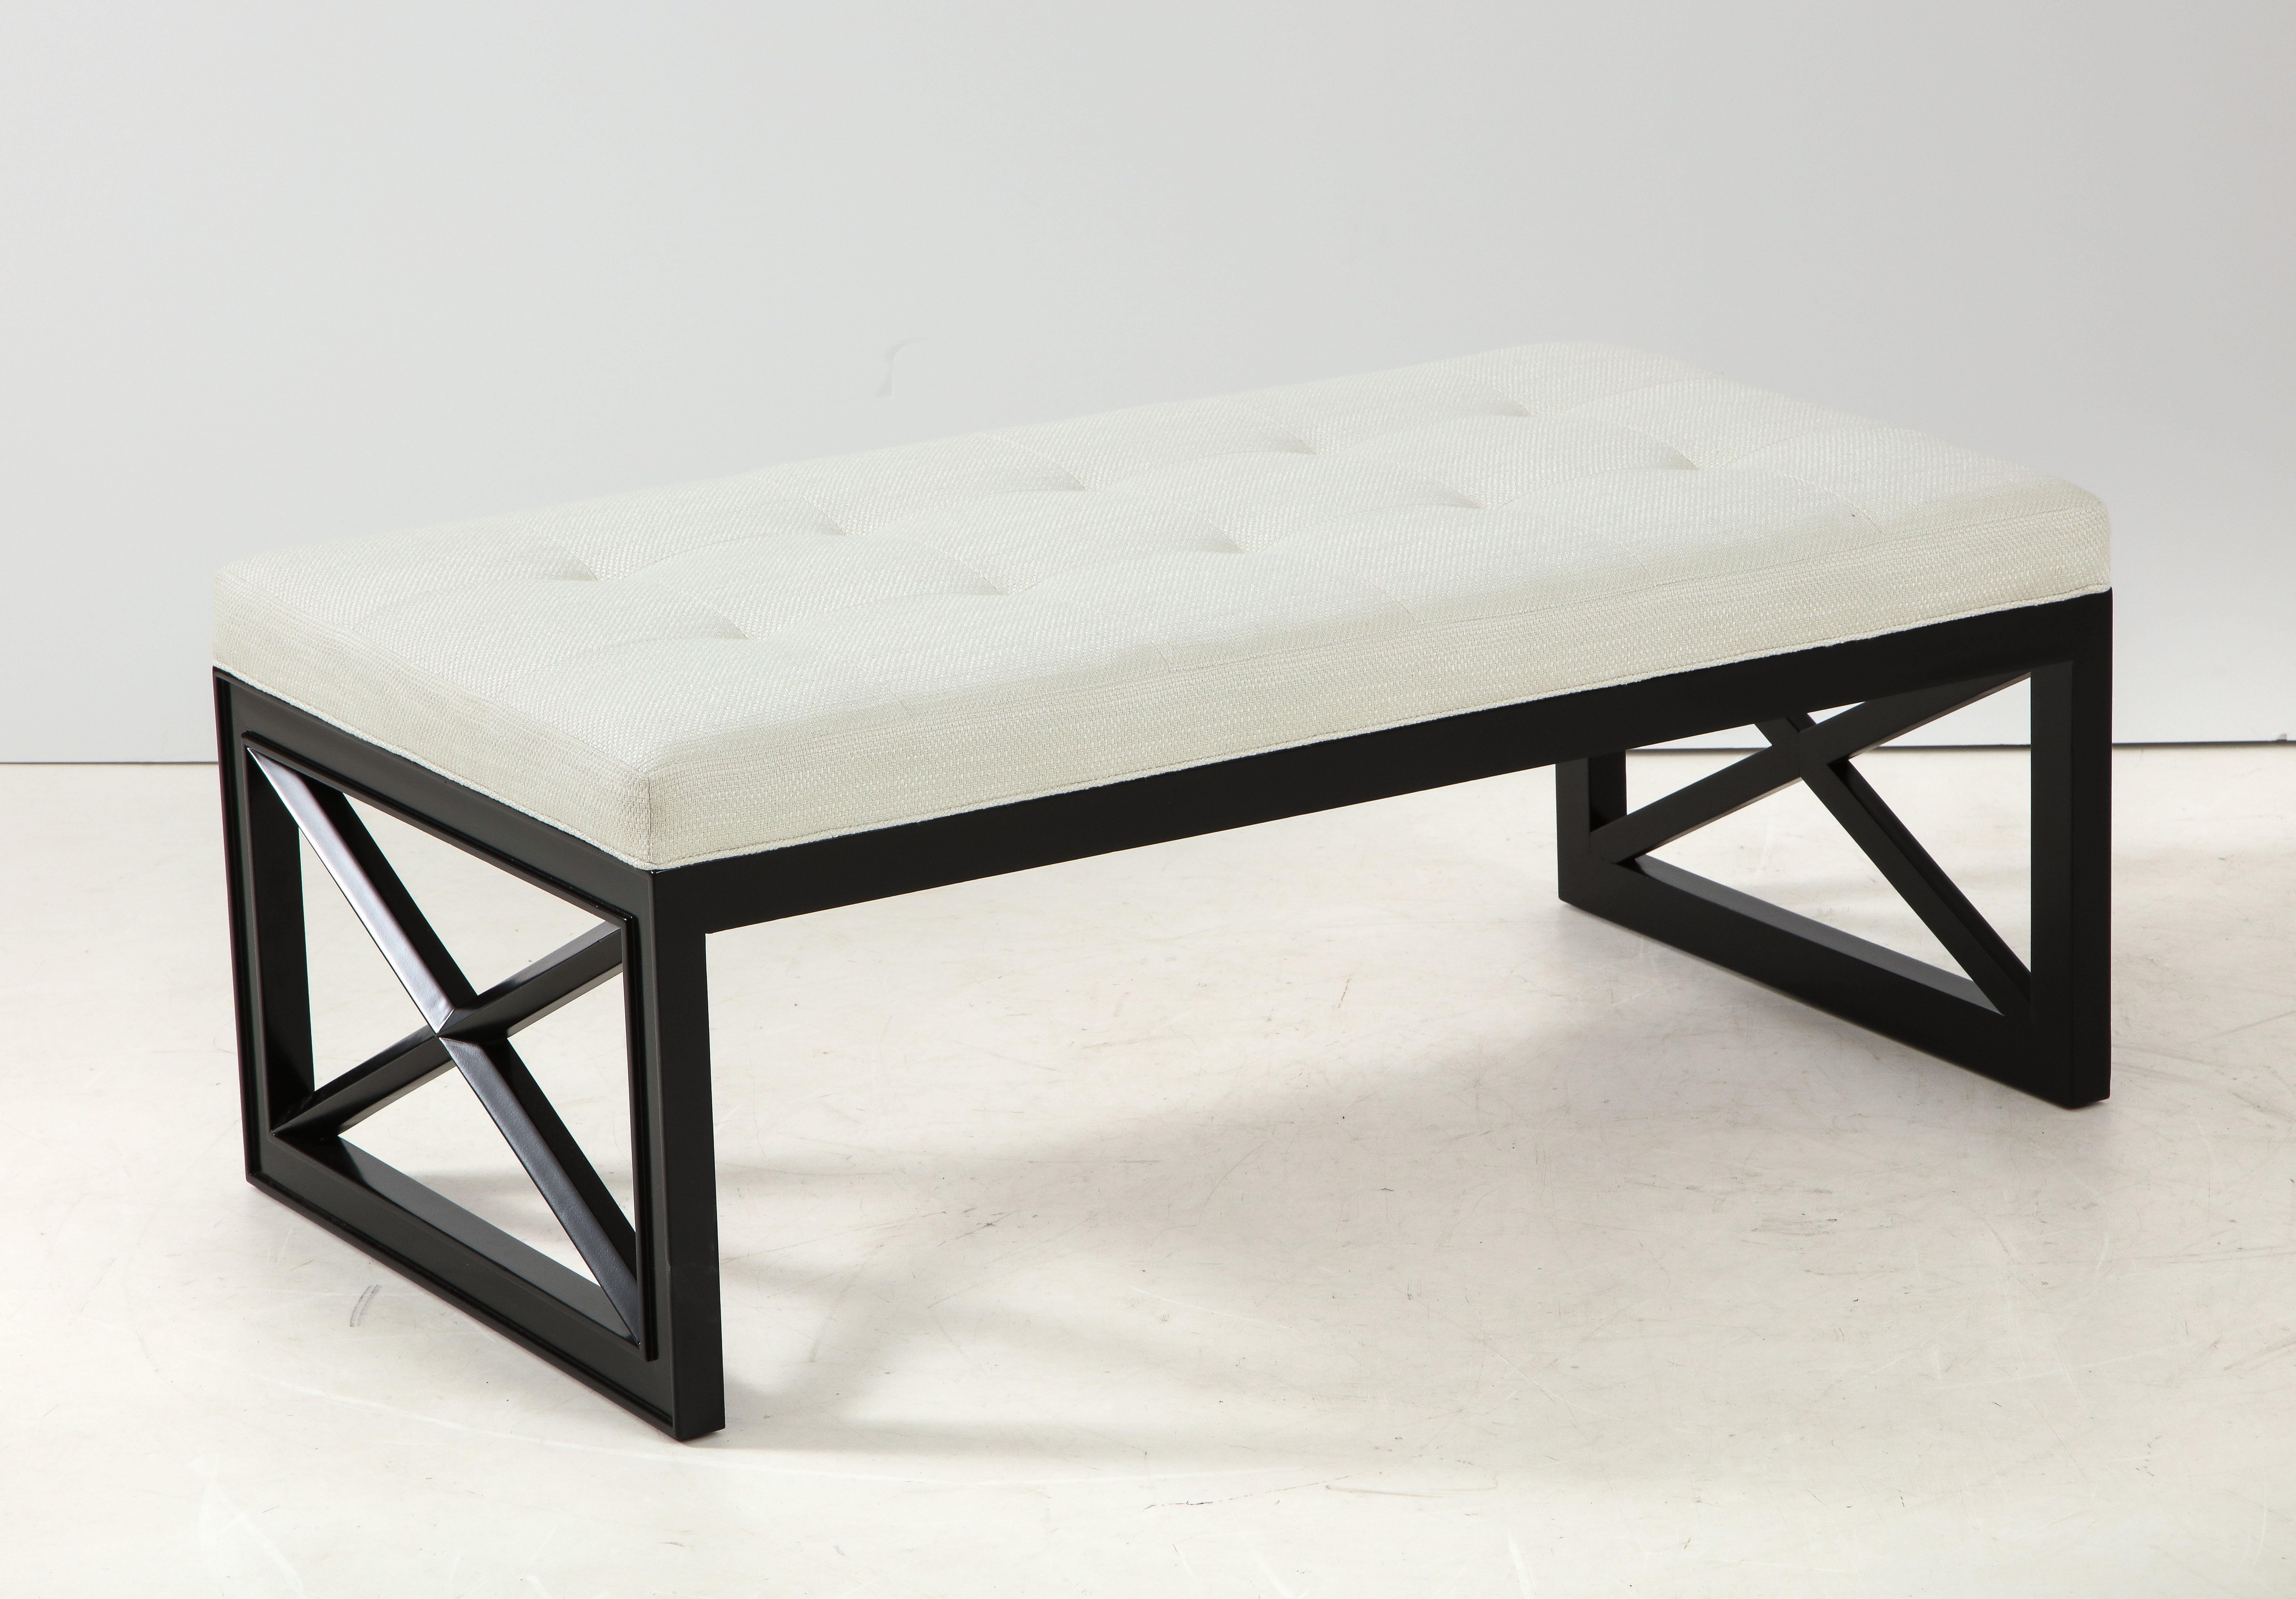 Black lattice frame bench by James Mont.
The bench has been newly refinished and reupholstered in an ivory
colored fabric with biscuit tufted detail.